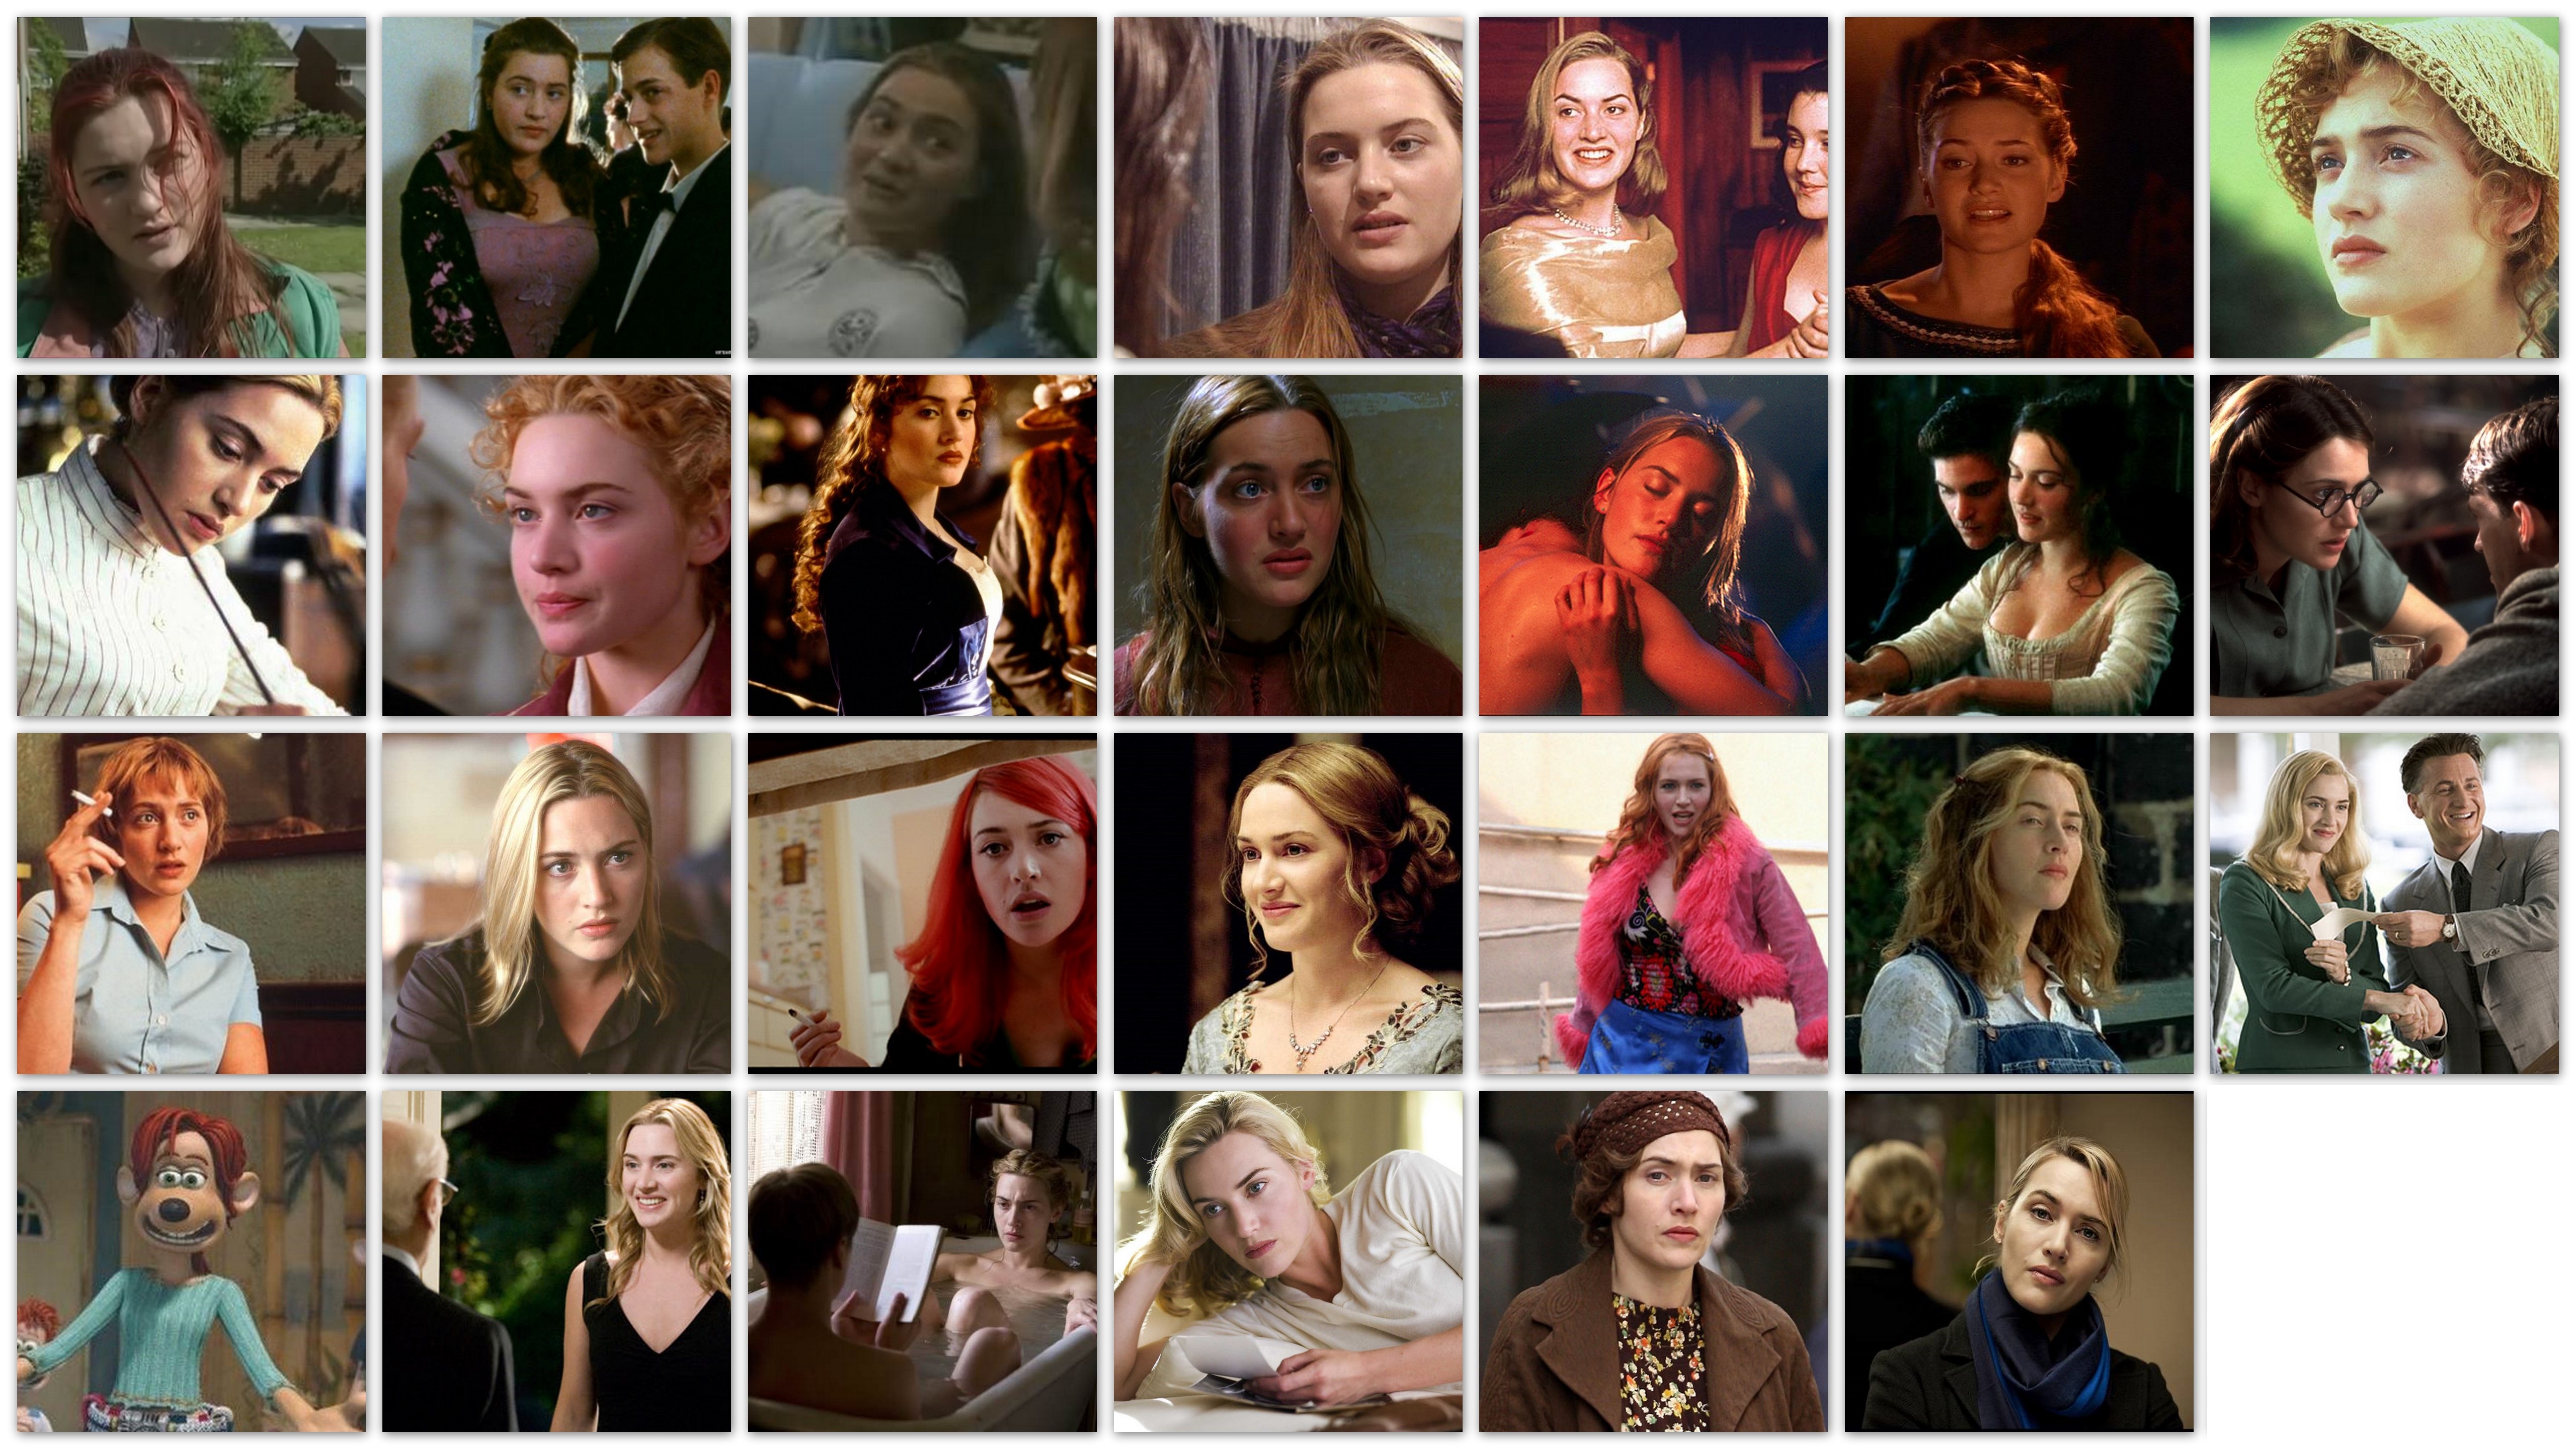 October 5th Ranking 33 Kate Winslet Movies on Her 42nd Birthday